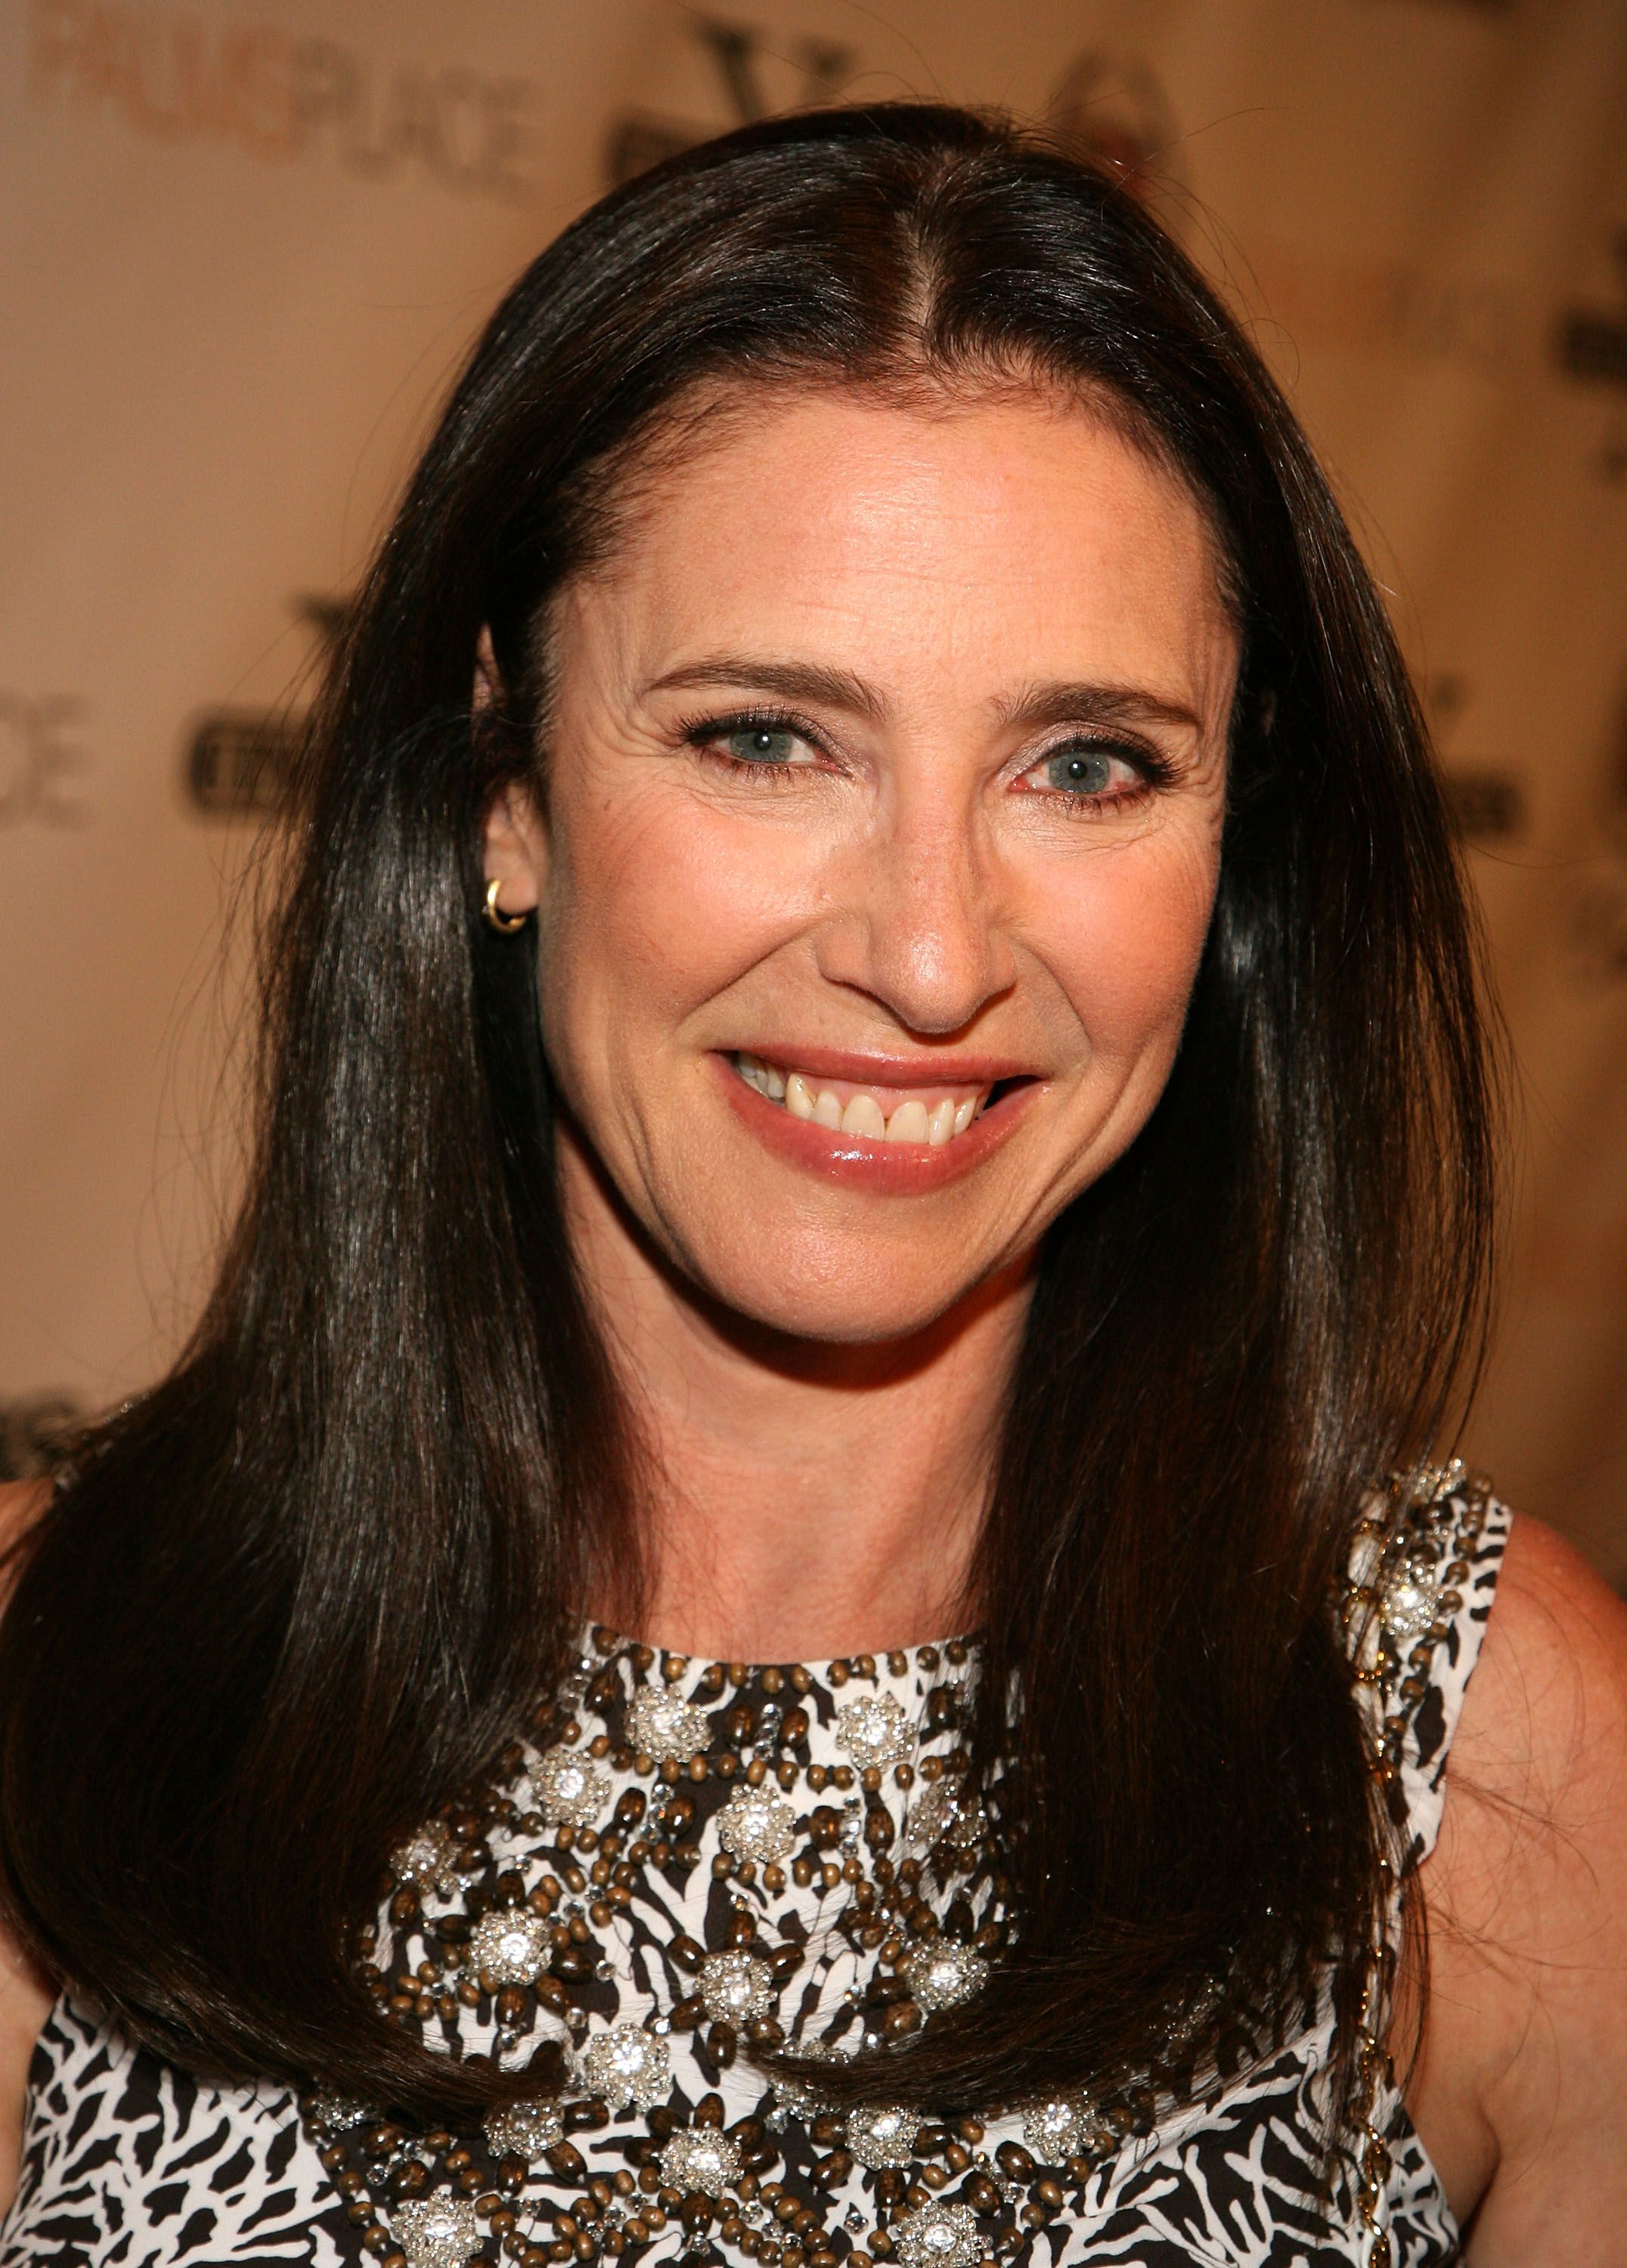 How tall is Mimi Rogers?